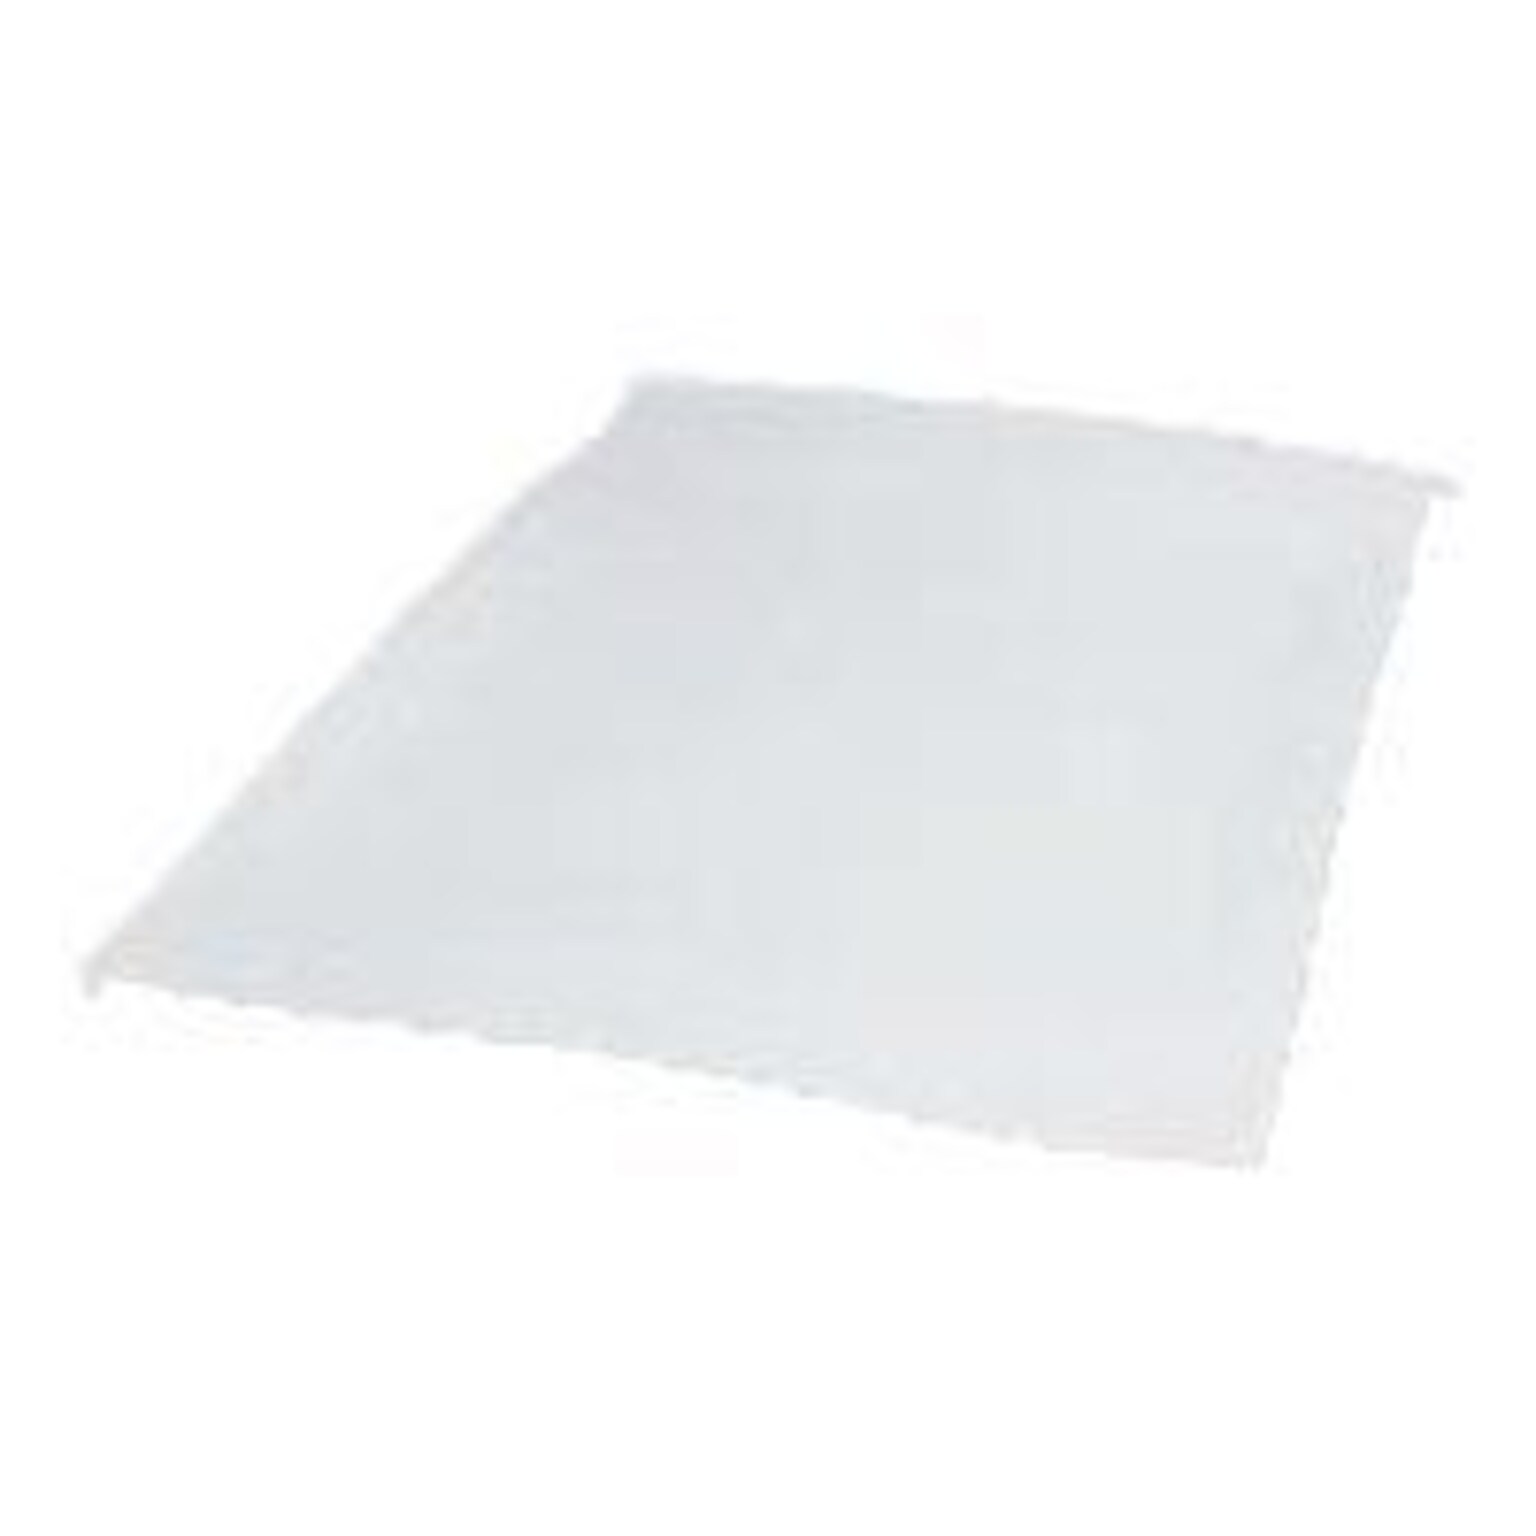 Kodak 1690783 Digital Science Transport Cleaning Sheet for I200; I800, 3500 Scanners, Clear, 50/Pack